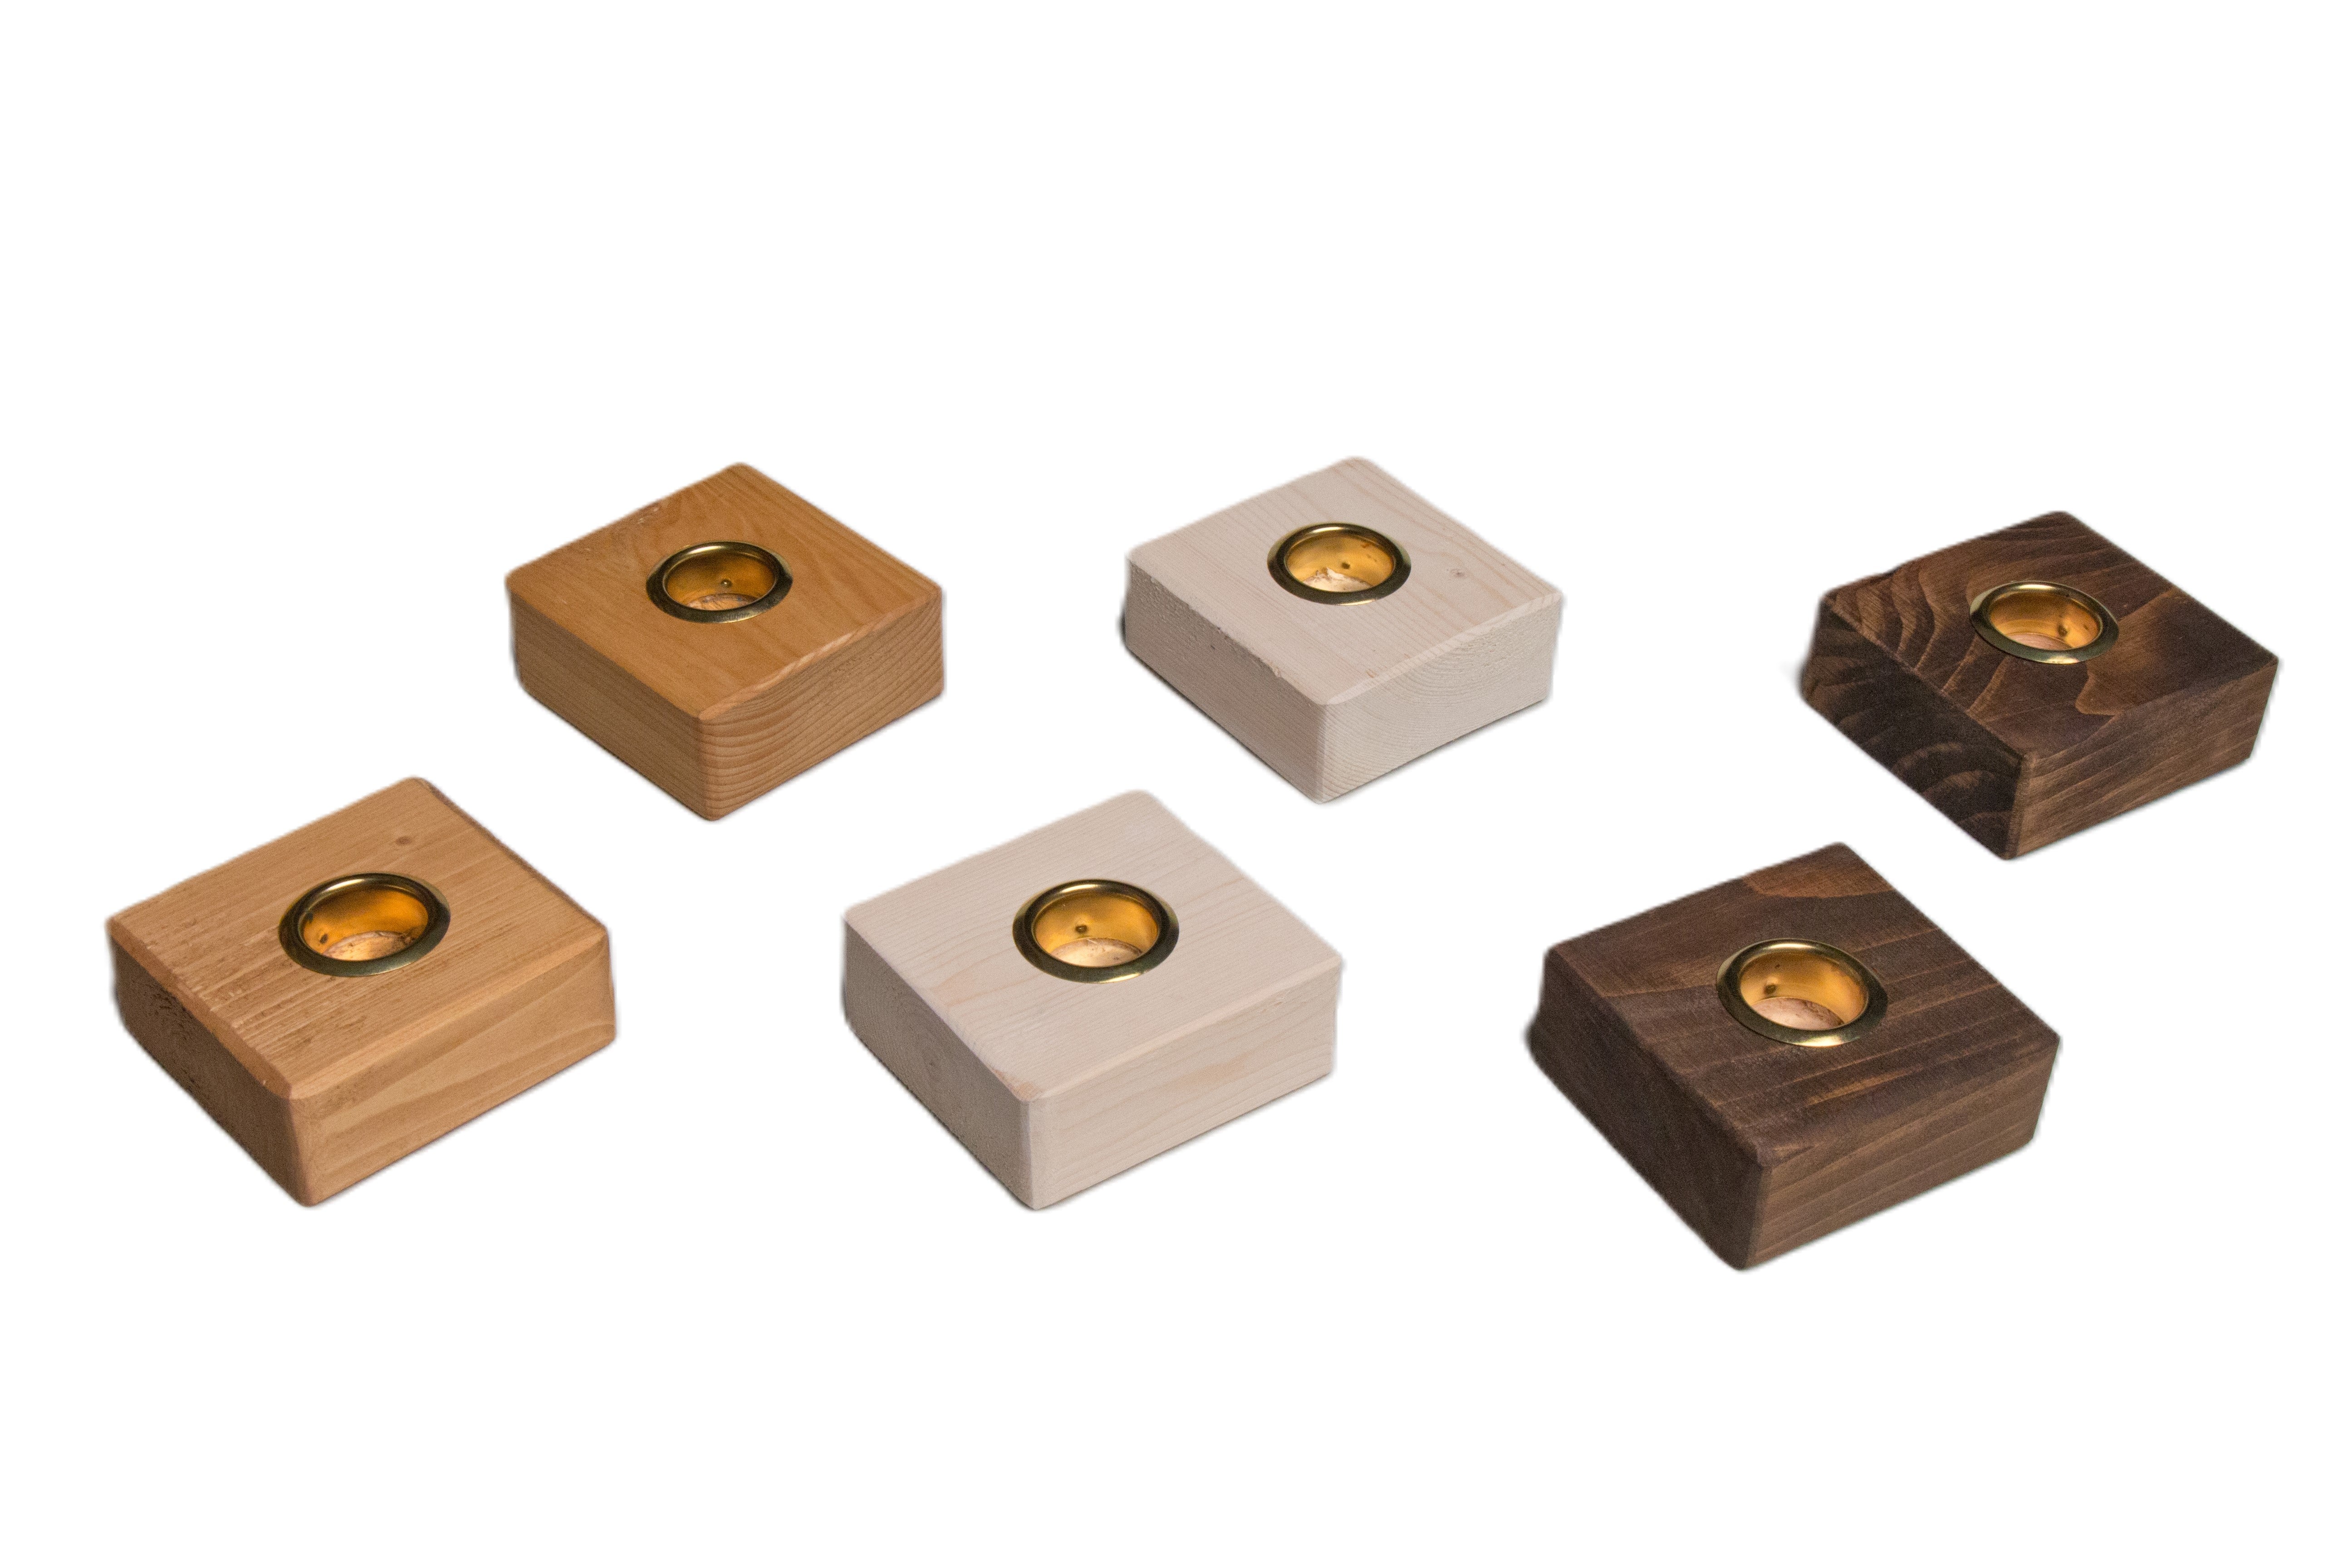 Wood Taper Candle Holders in golden wood color, white wash wood color, and dark brown. Gold edging holds the taper candle.